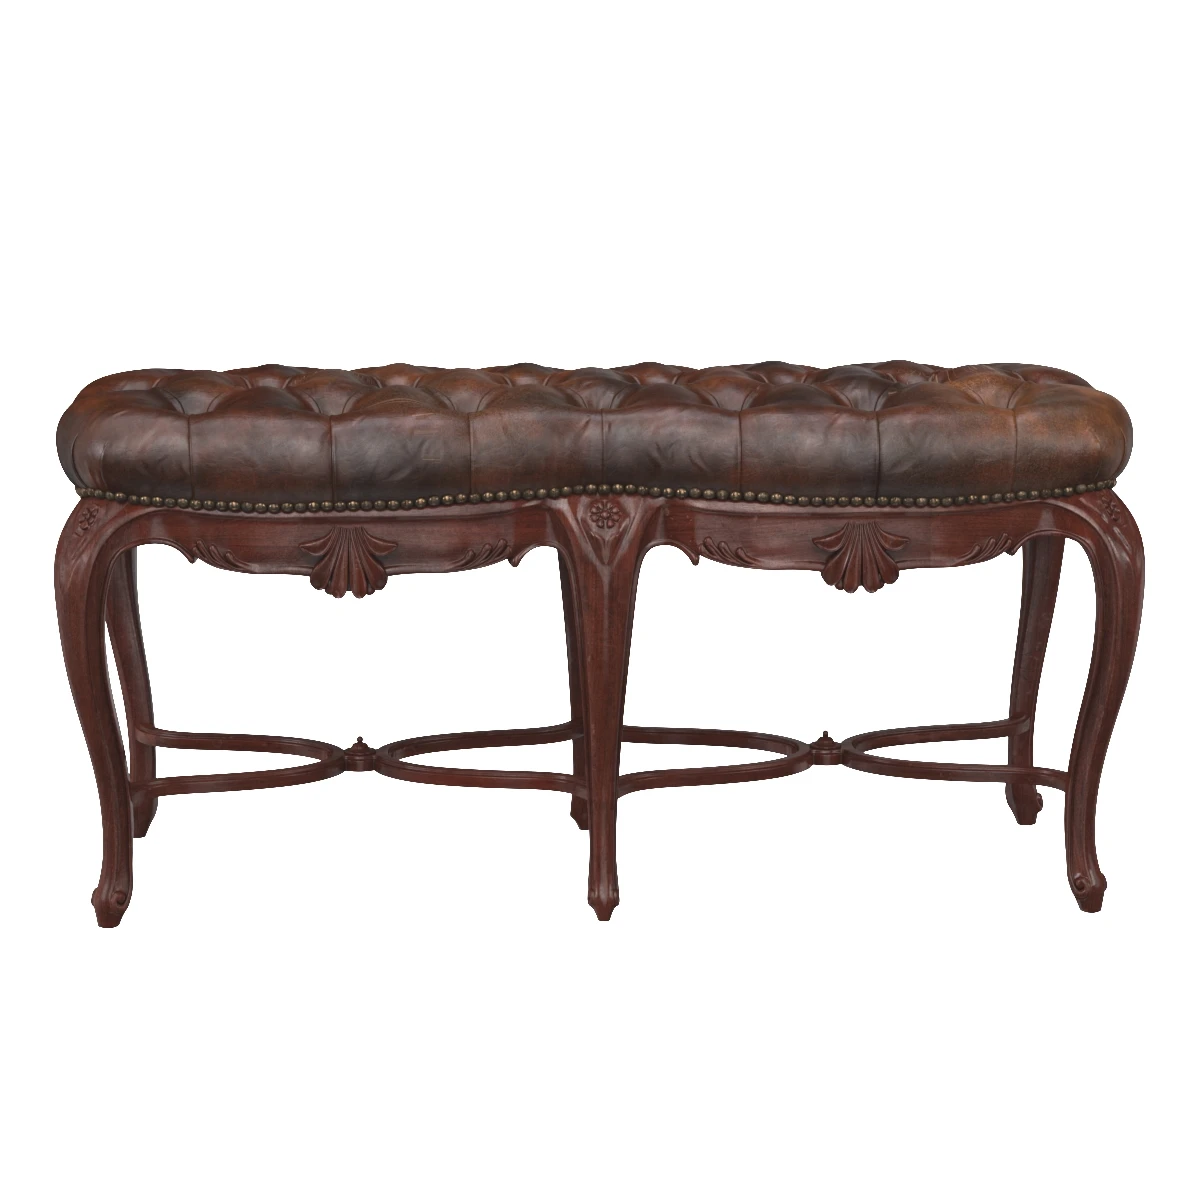 French Leather Tufted Bench C 1900s 3D Model_06